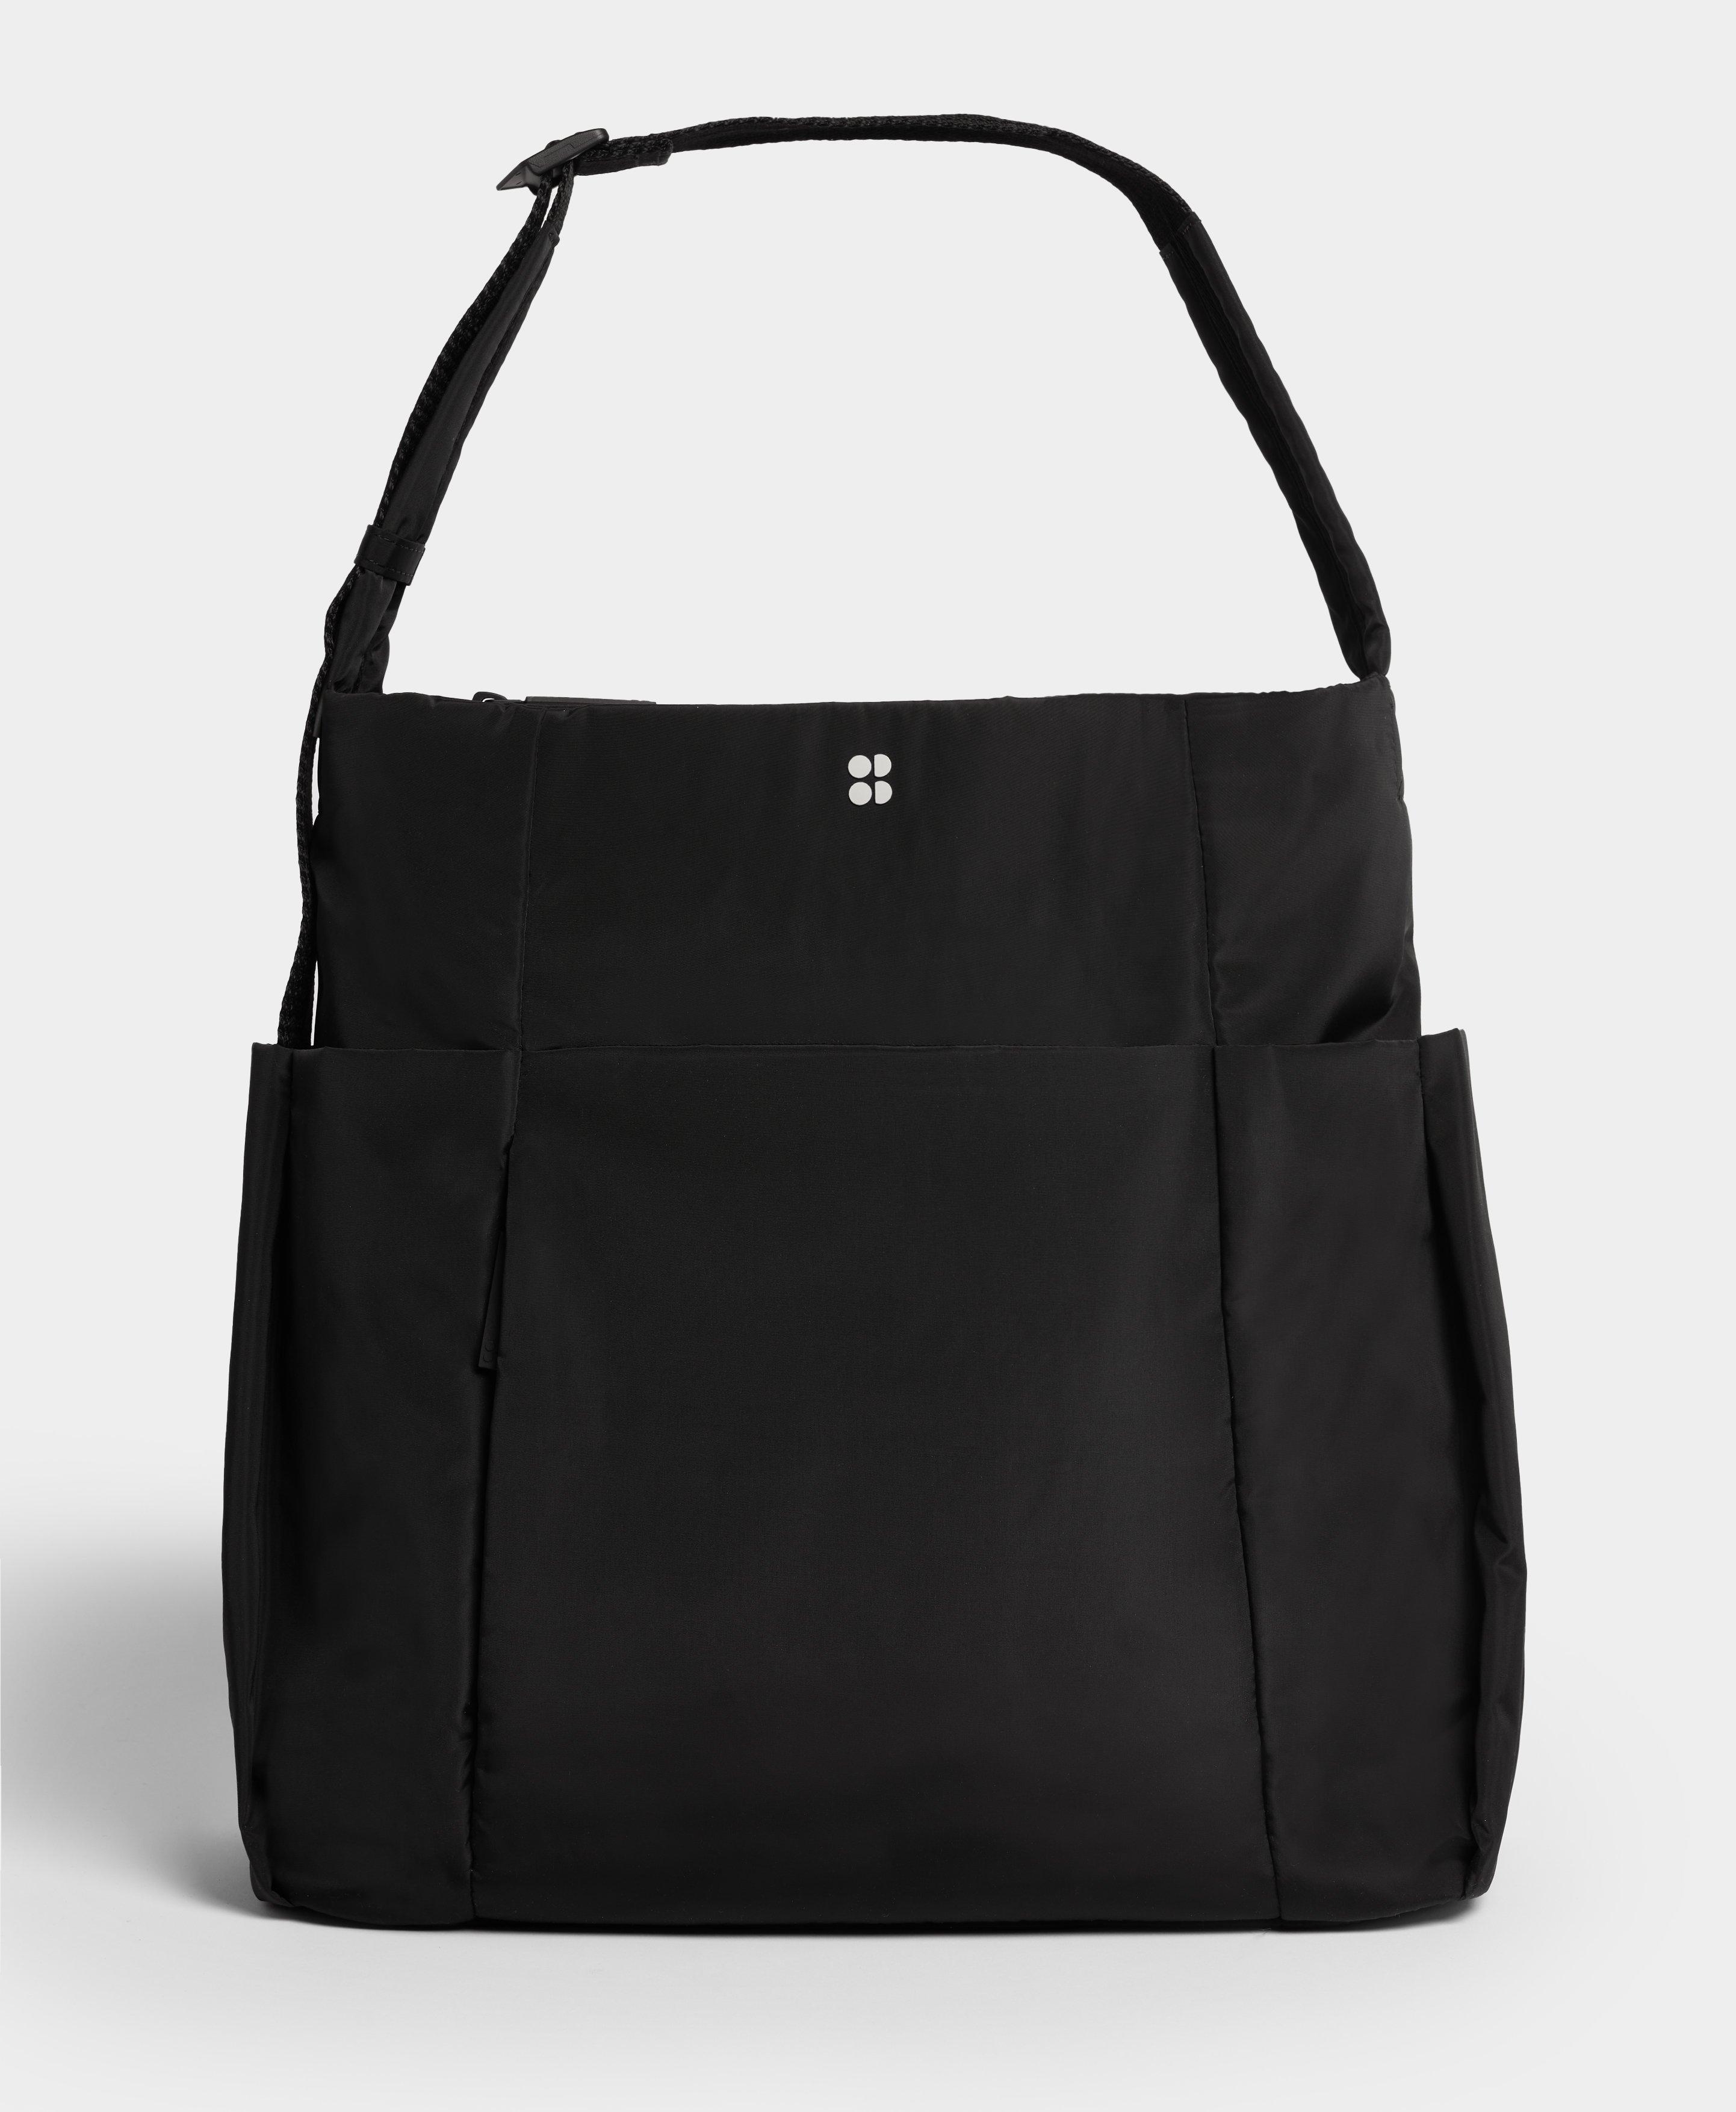 Buy KATE SPADE All Day Tote Bag with Pouch, Black Color Women